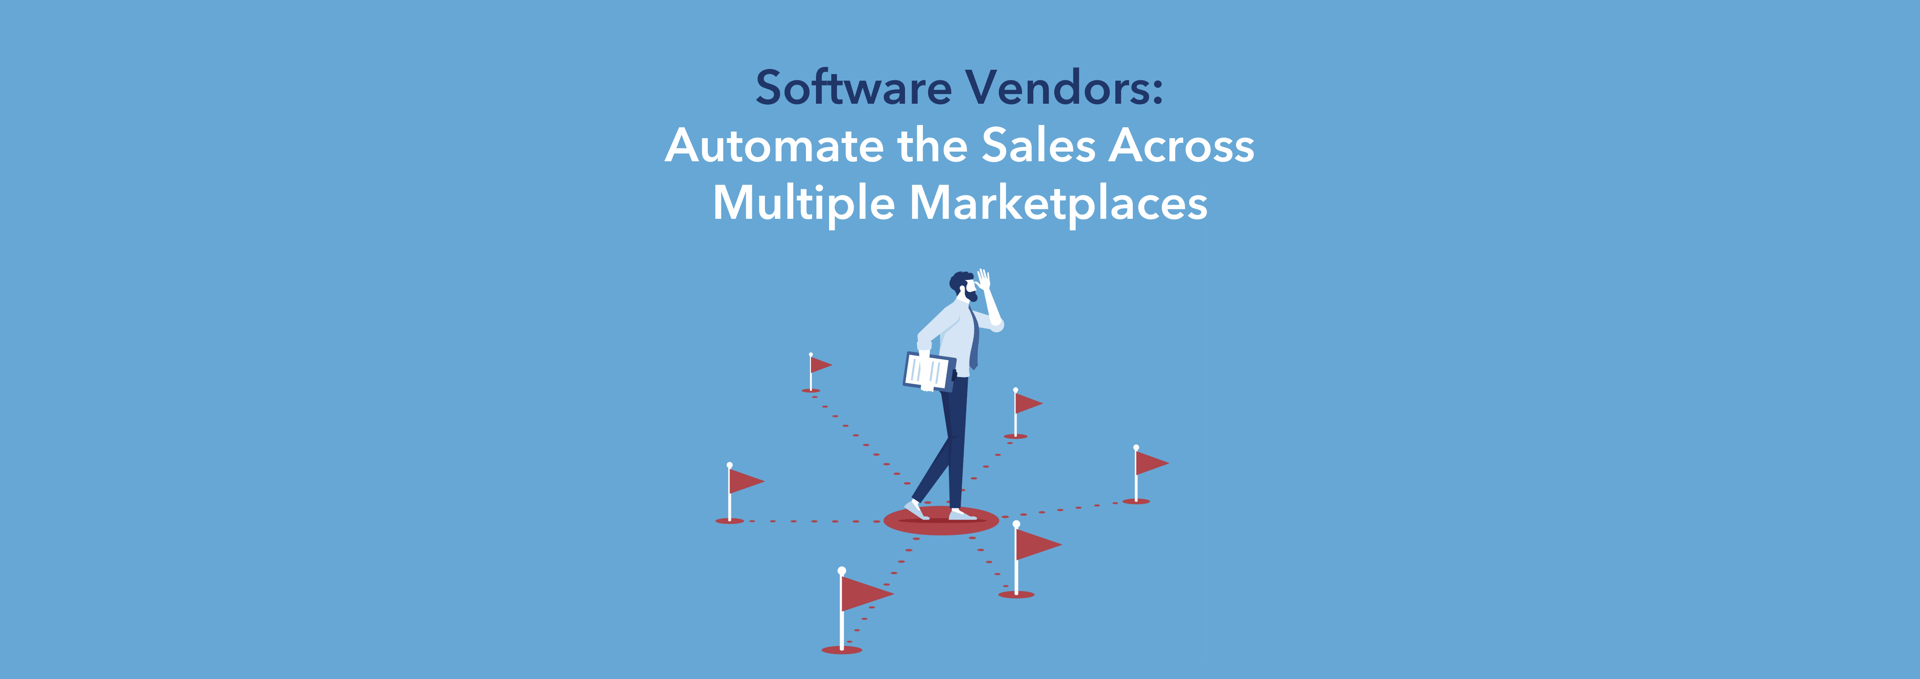 How Vendors Can Automate the Sales Across Multiple Marketplaces